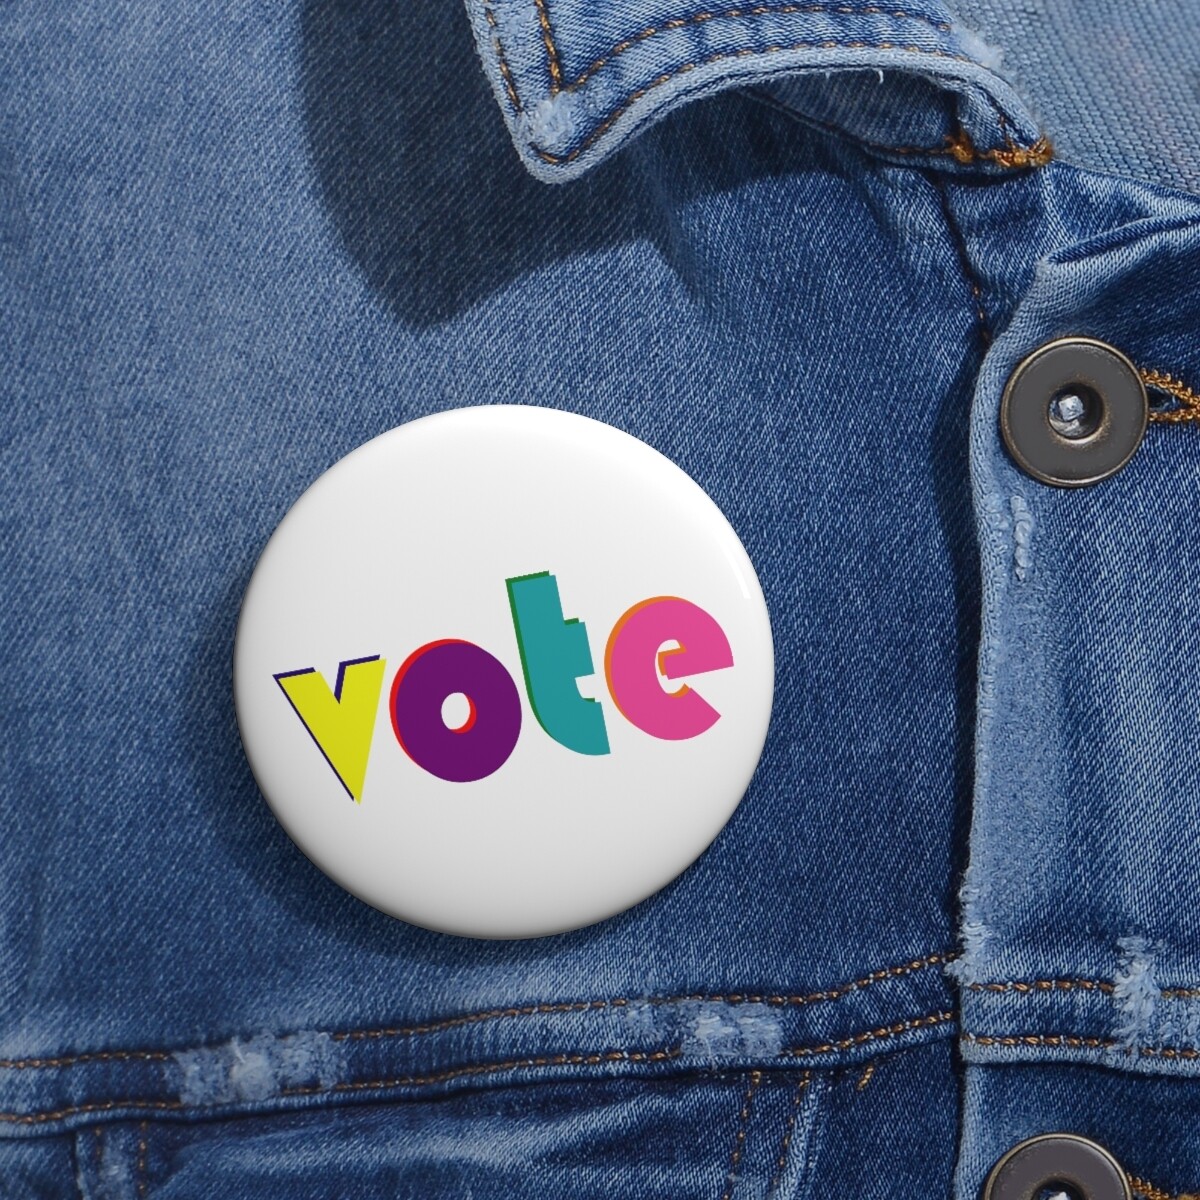 VOTE Your voice matters Multicolor Rainbow text Pin Buttons 2 sizes 1.25" and 2" Backpack pin buttons